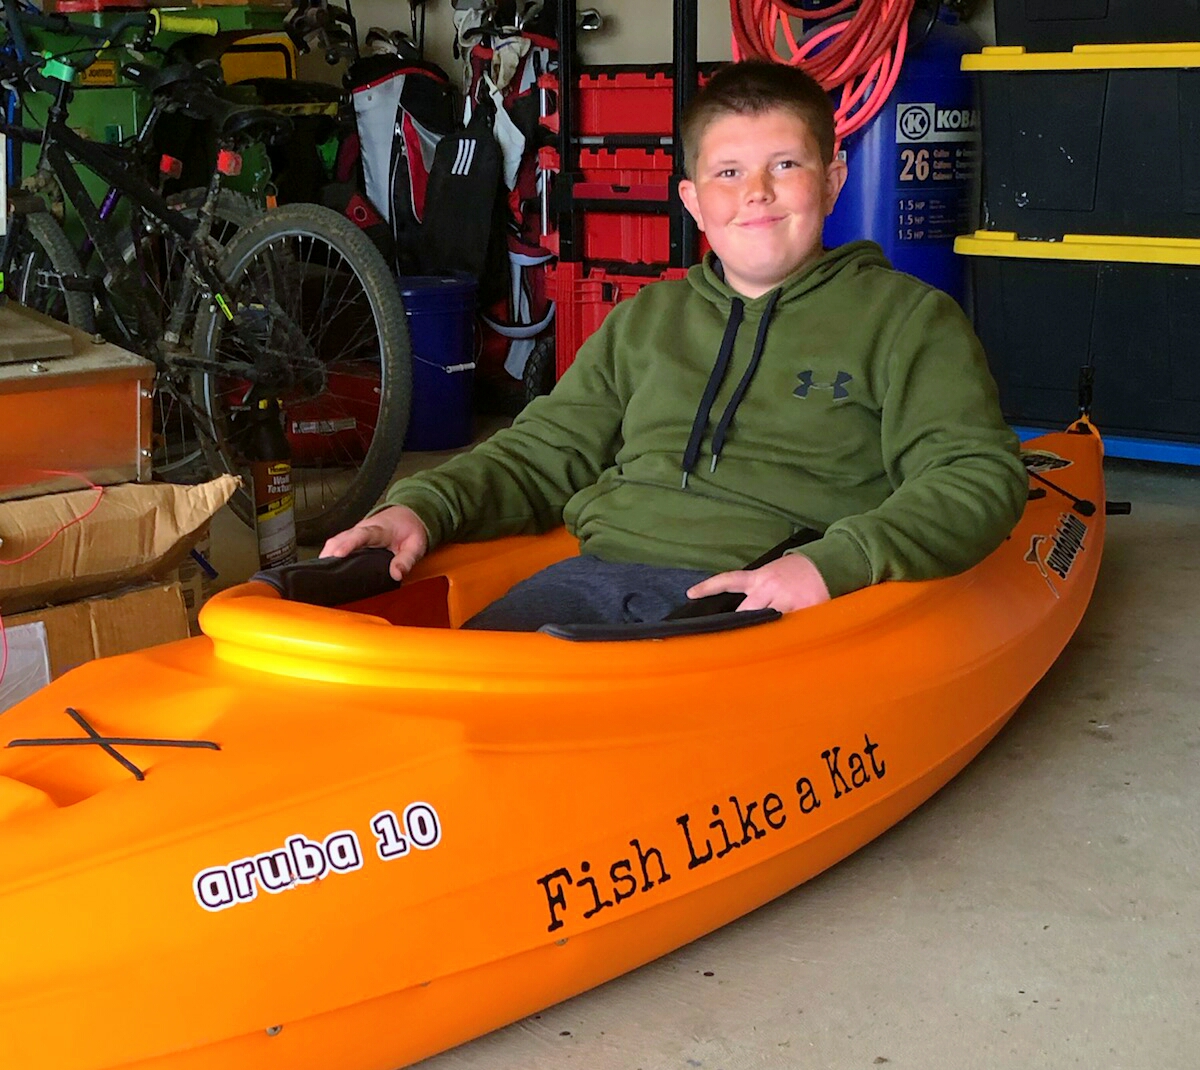 Hunter testing out his new kayak in his family's garage